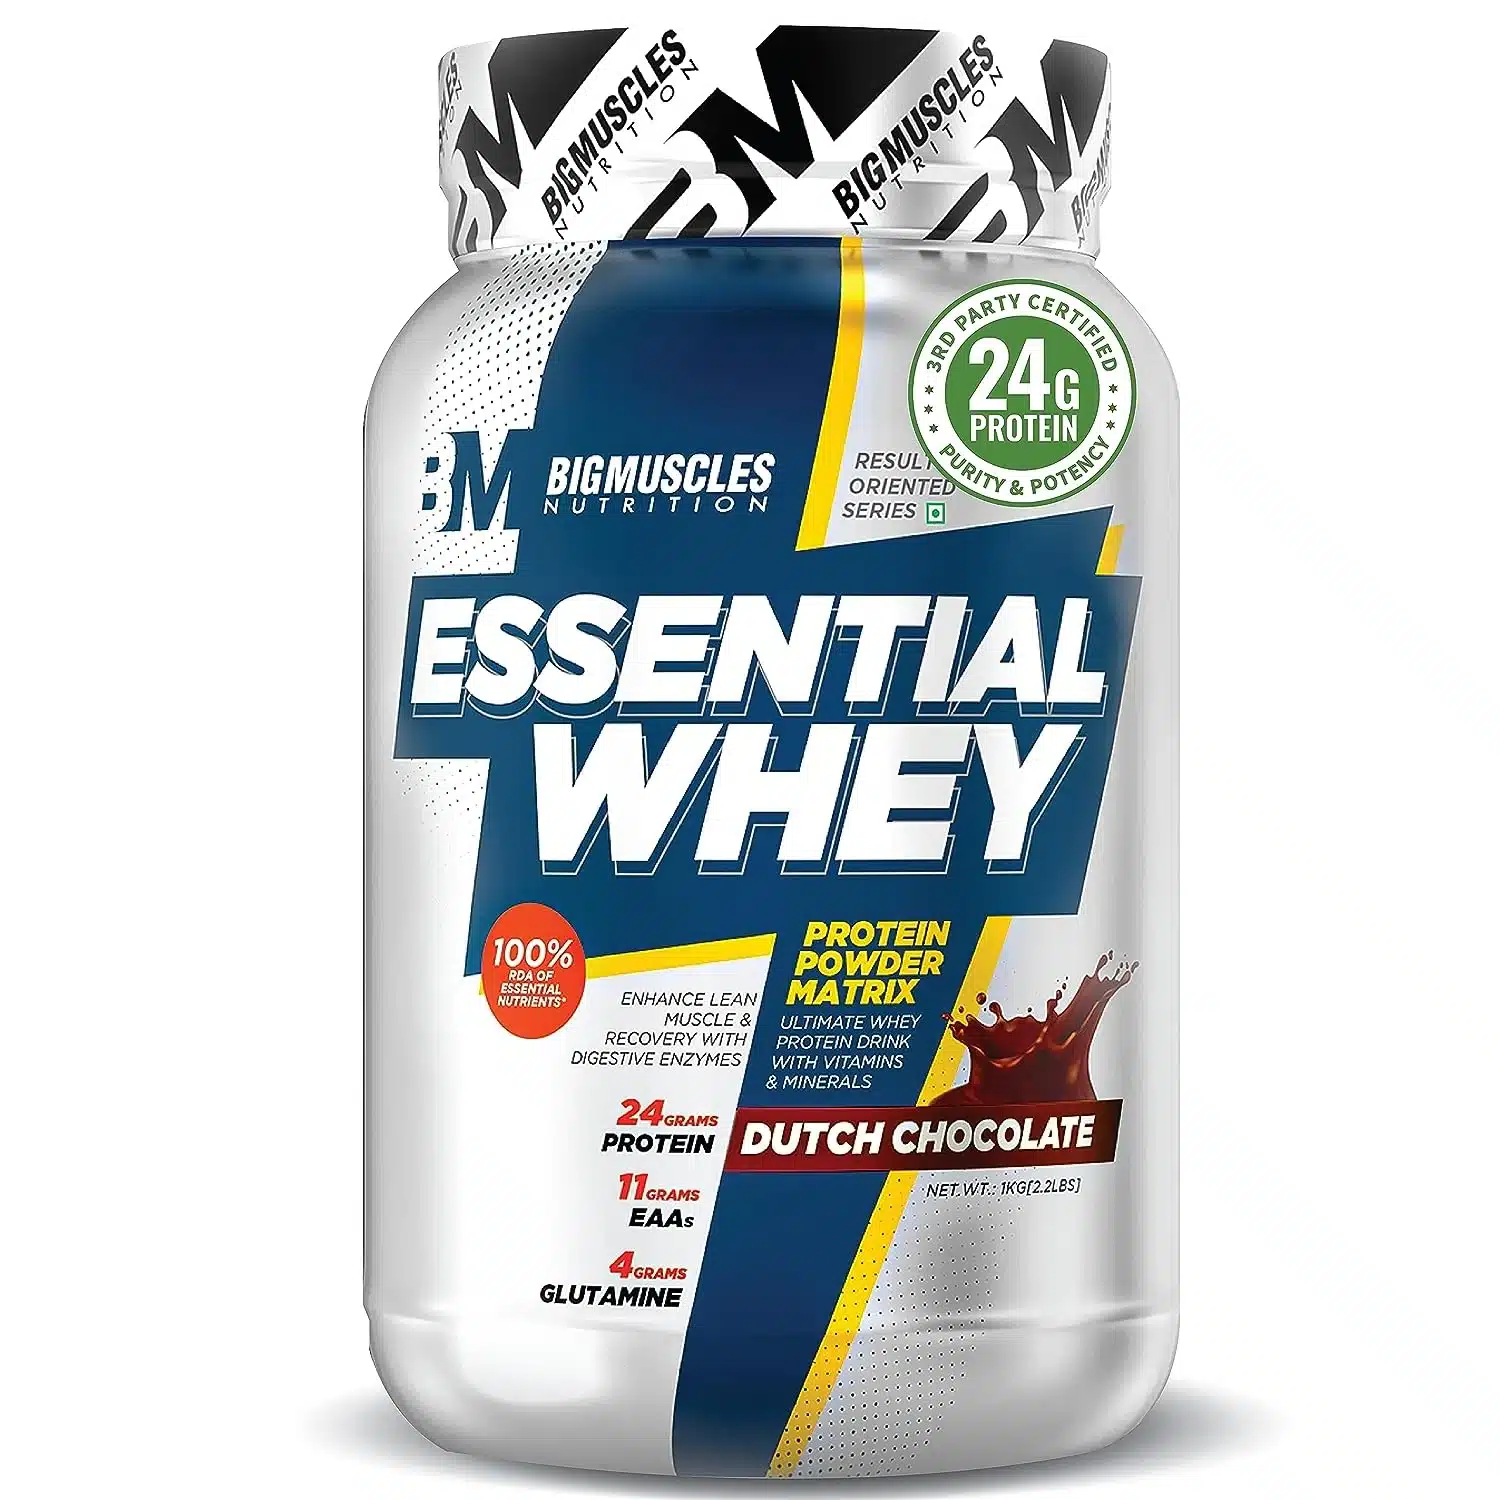 Bigmuscles Nutrition Essential Whey Protein 1Kg.